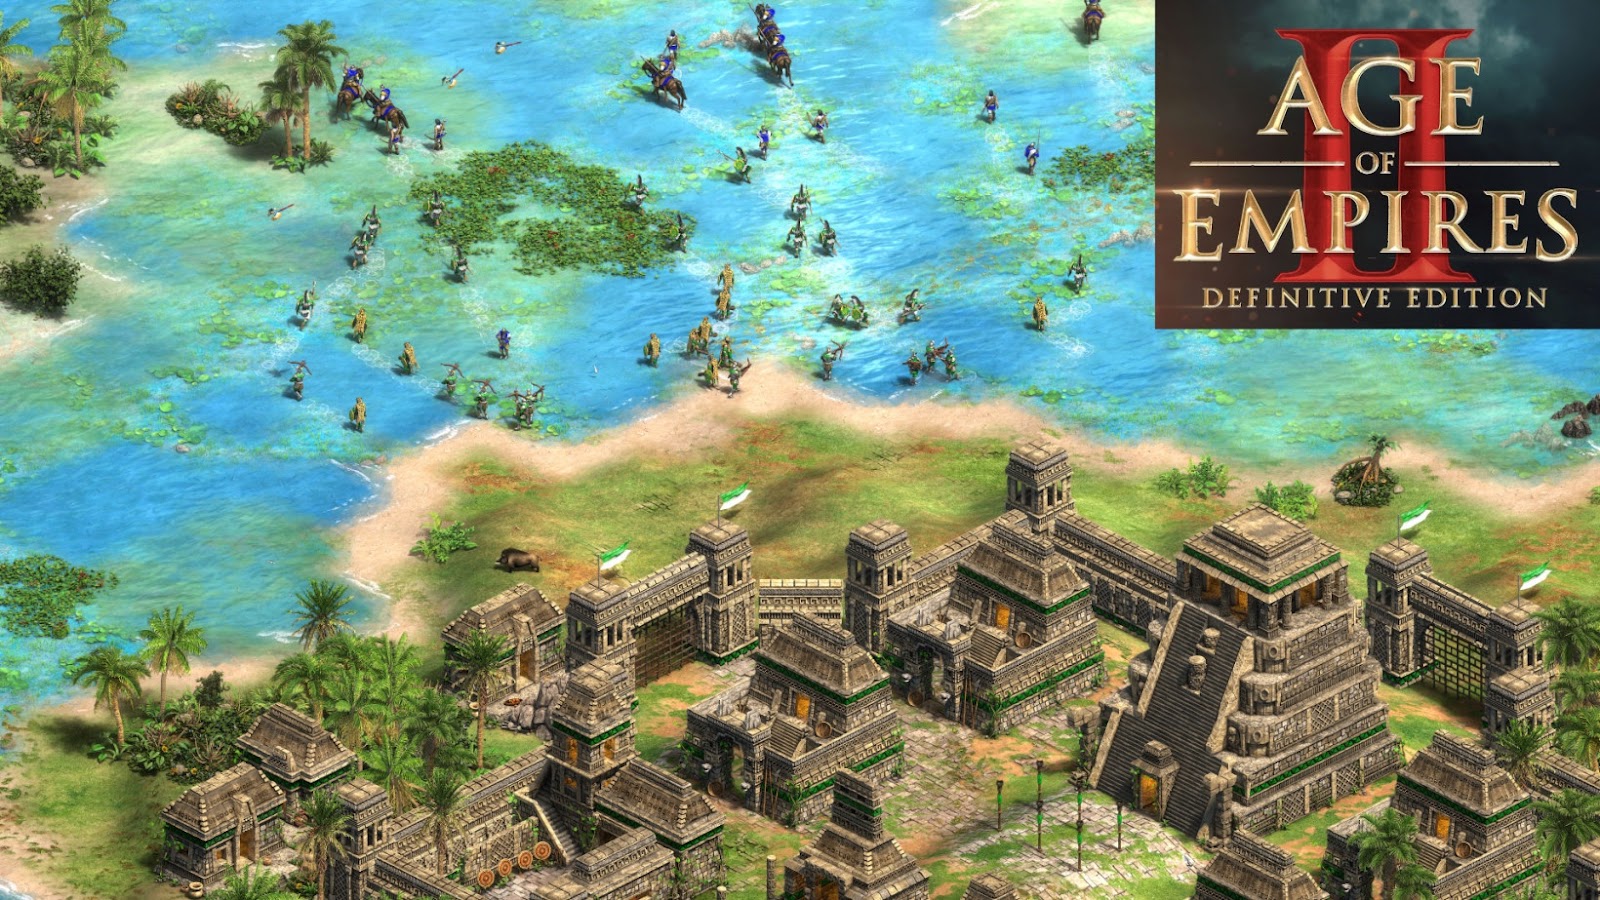 Age of empires 2: Definitive Edition